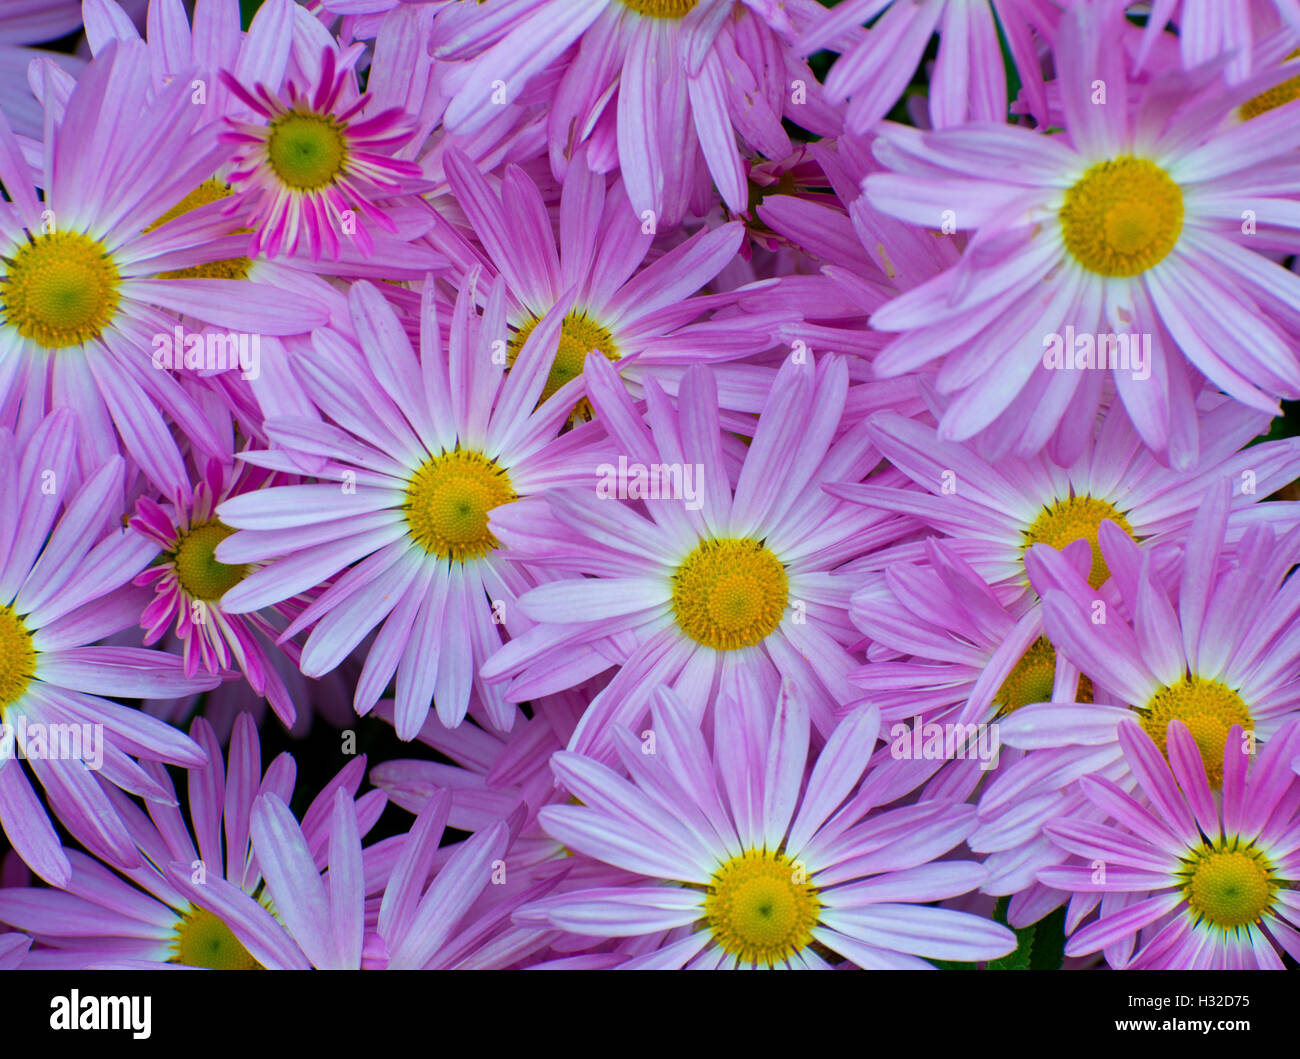 Looking down on a bunch of Pink Daisy's. Makes a great background. Stock Photo